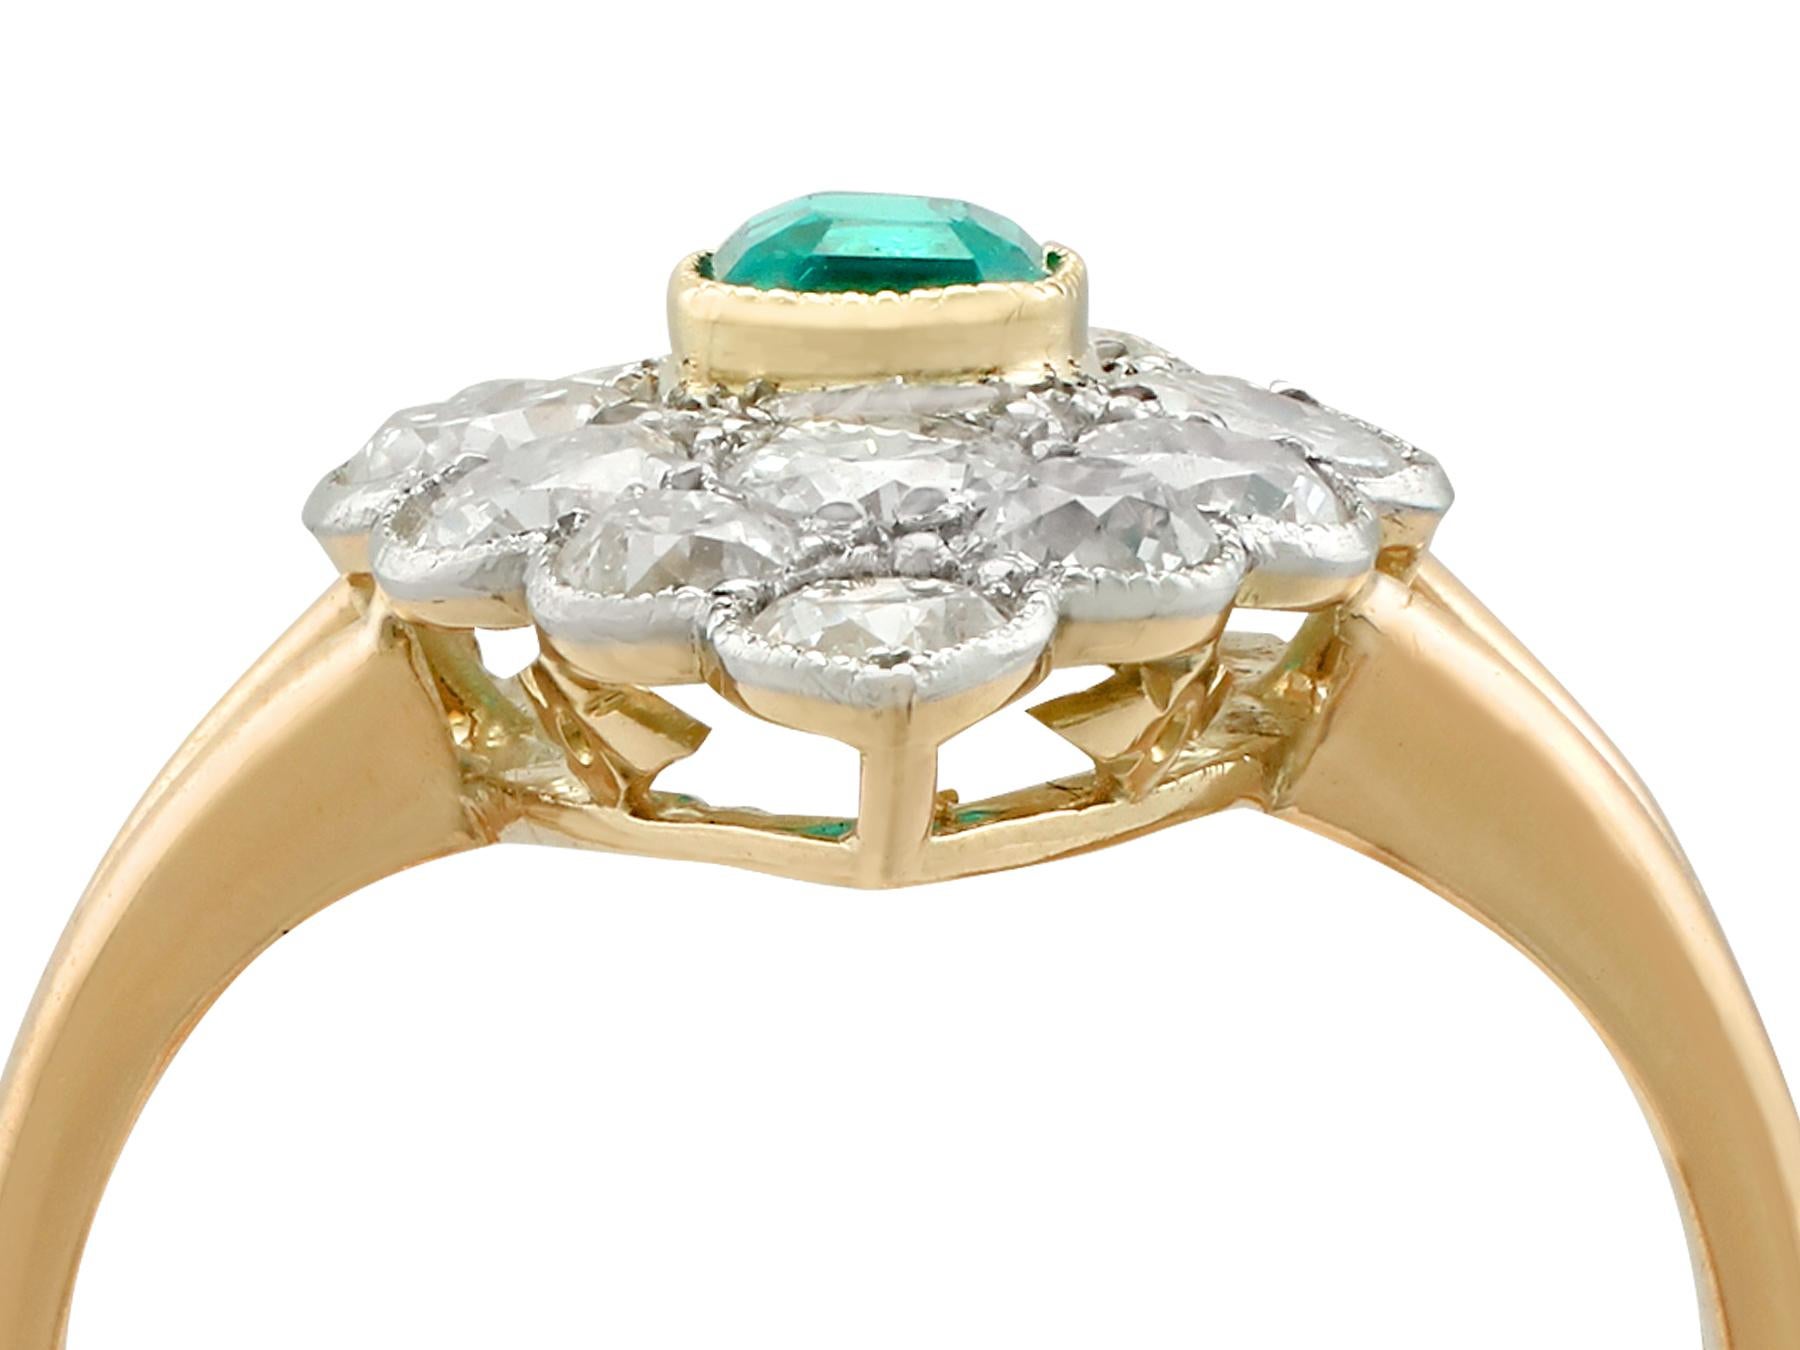 A stunning antique 1900's 0.55 carat emerald and 2.66 carat diamond, 15 carat and 22k gold dress ring; part of our diverse antique jewellery collections.

This stunning fine and impressive diamond and emerald ring has been crafted in 15k yellow and